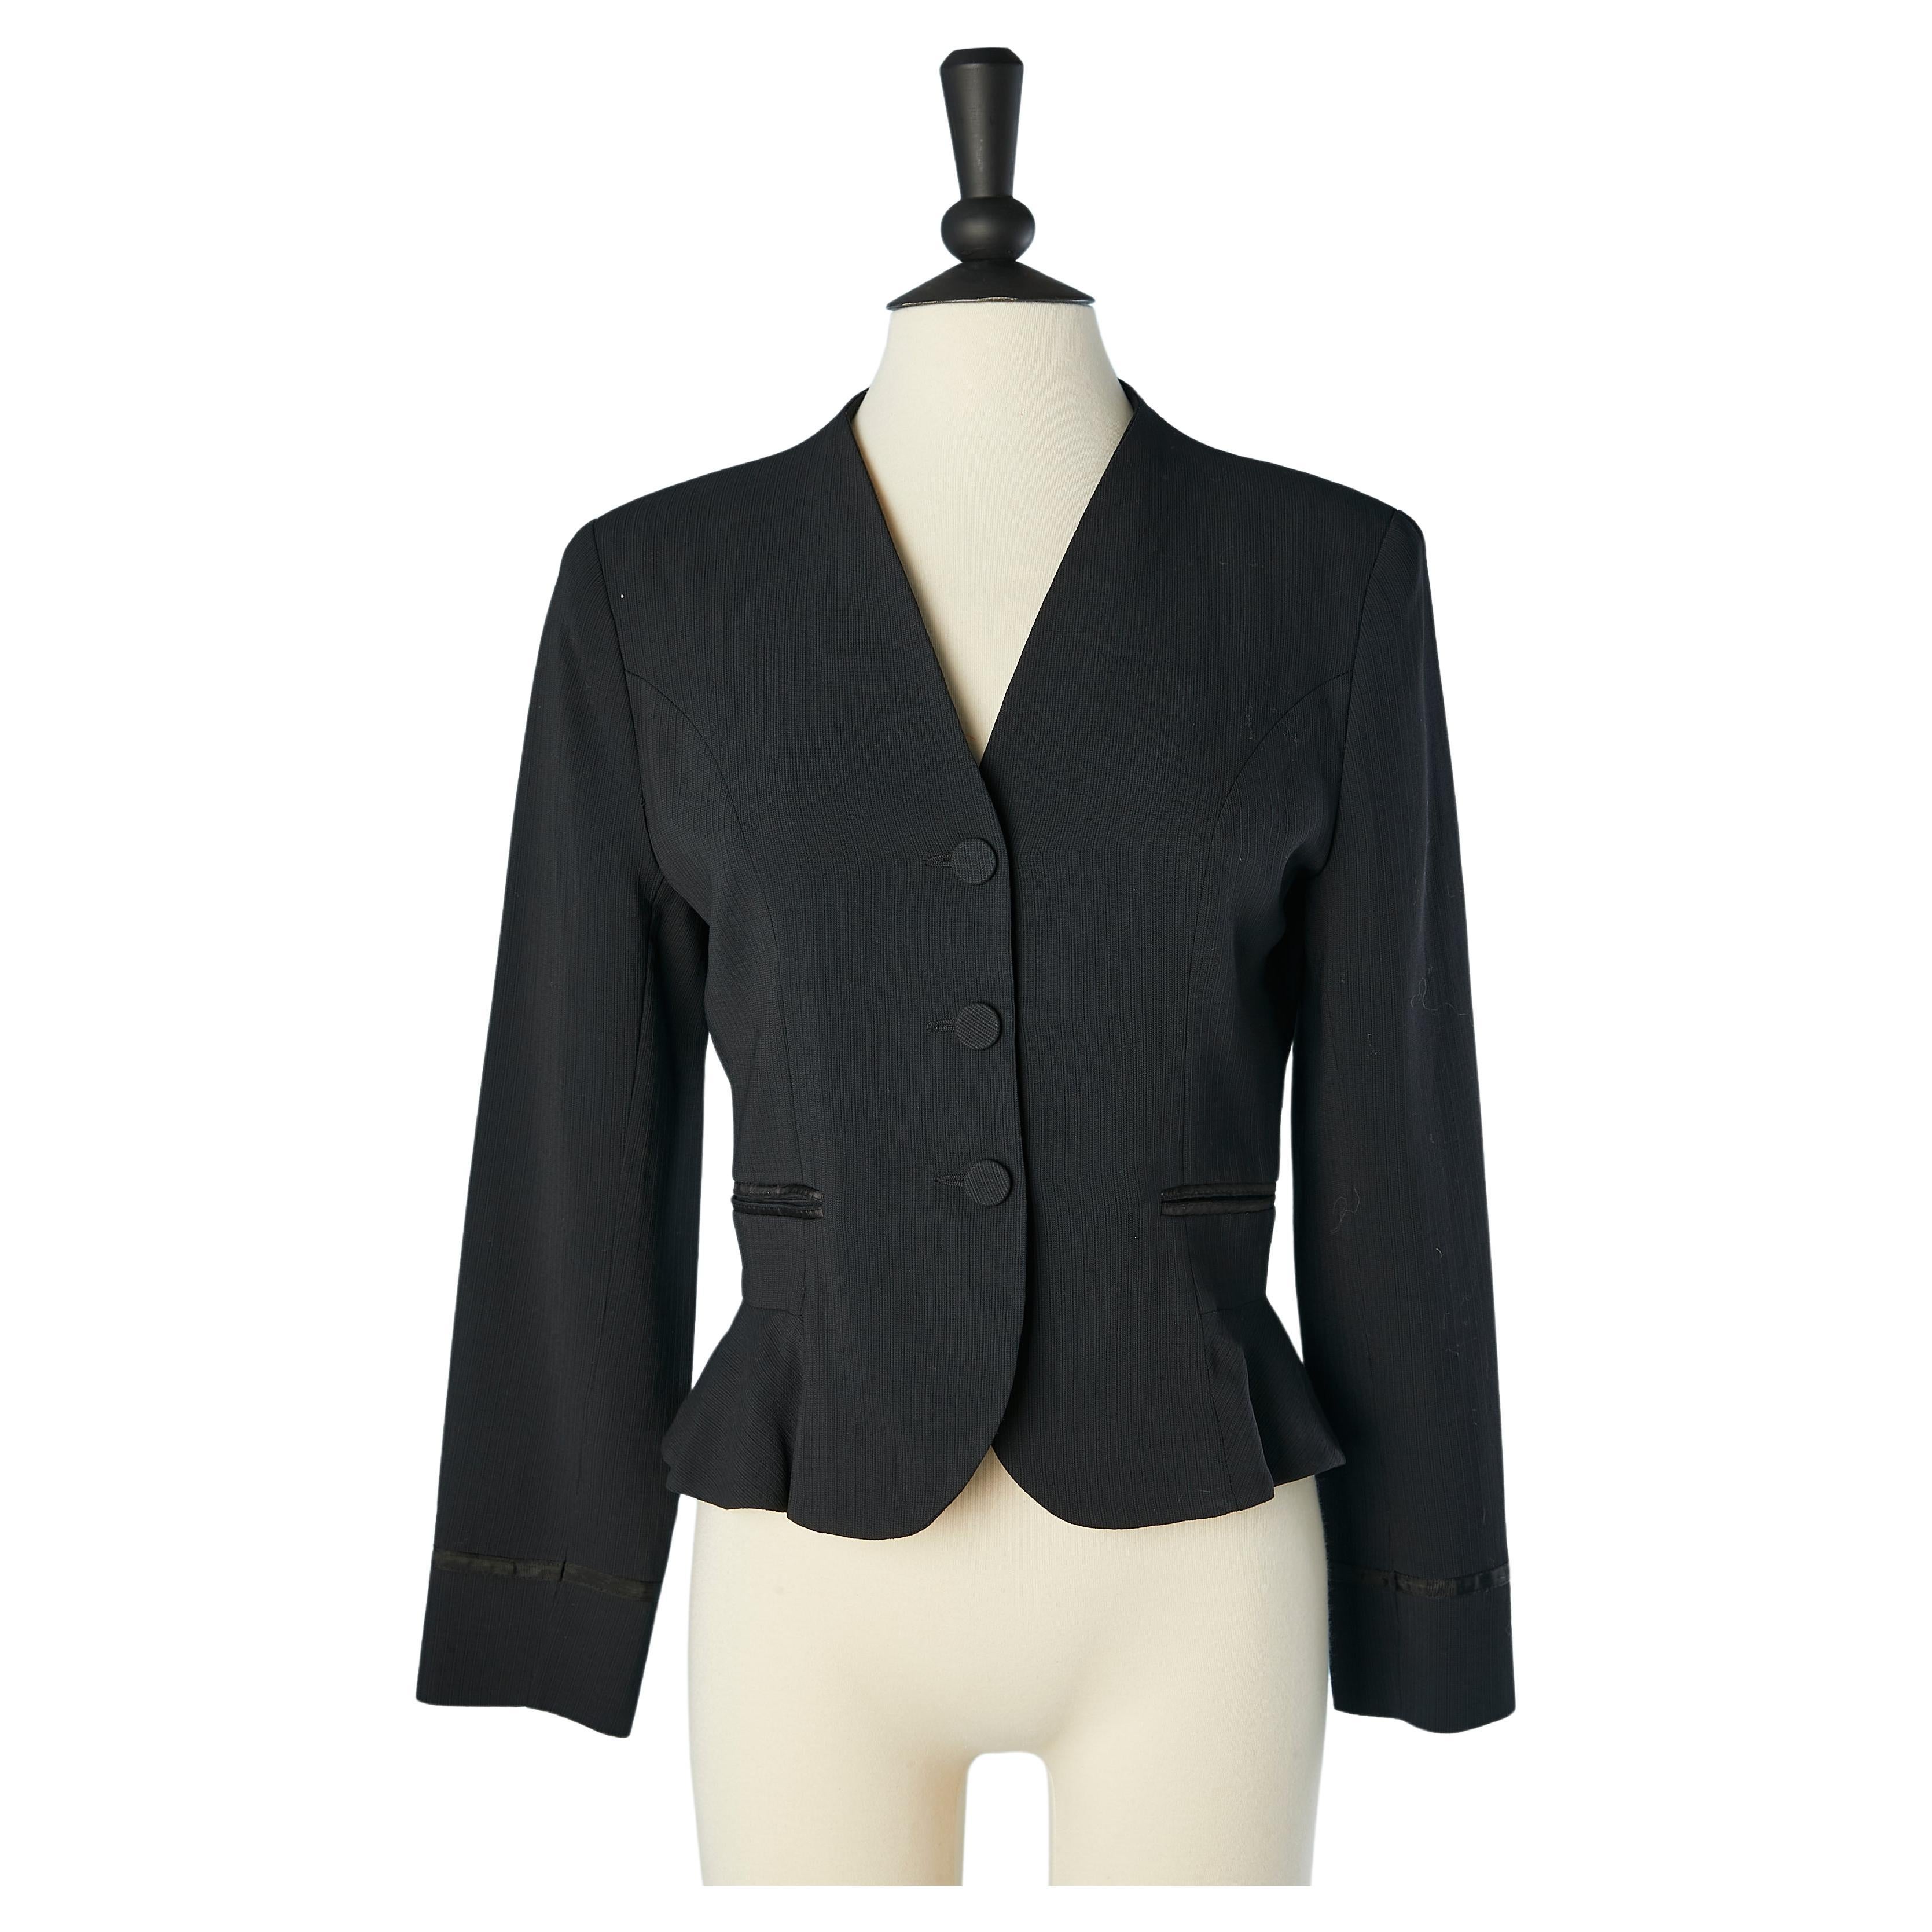 Sigle breasted black jacket Christian Lacroix  For Sale